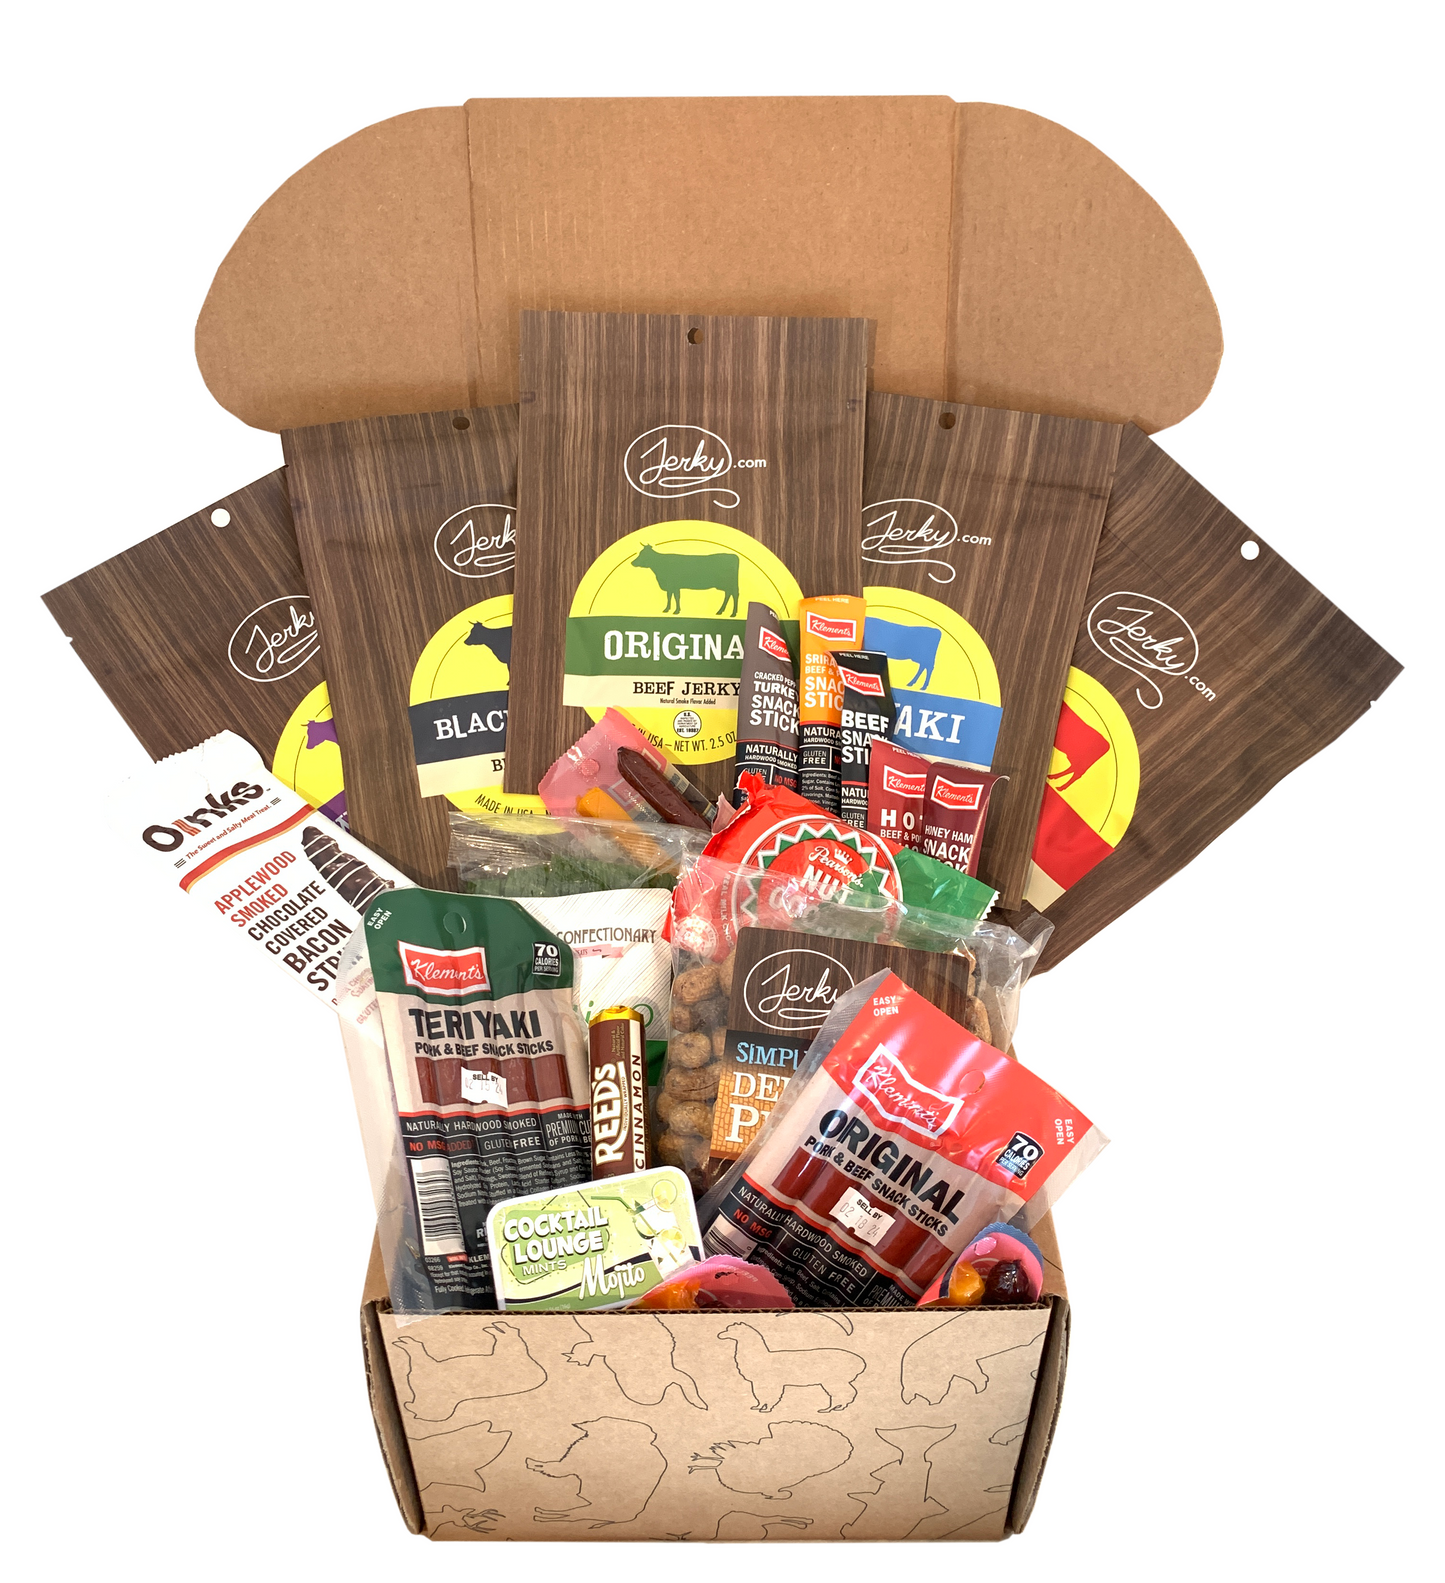 GiftWorld Meat and Hot Sauce Food Gift Basket, Meat Gift Baskets for Men,  Meat Lovers Gifts, Food Gifts Meat Set, Food Assortment Meat Care Package